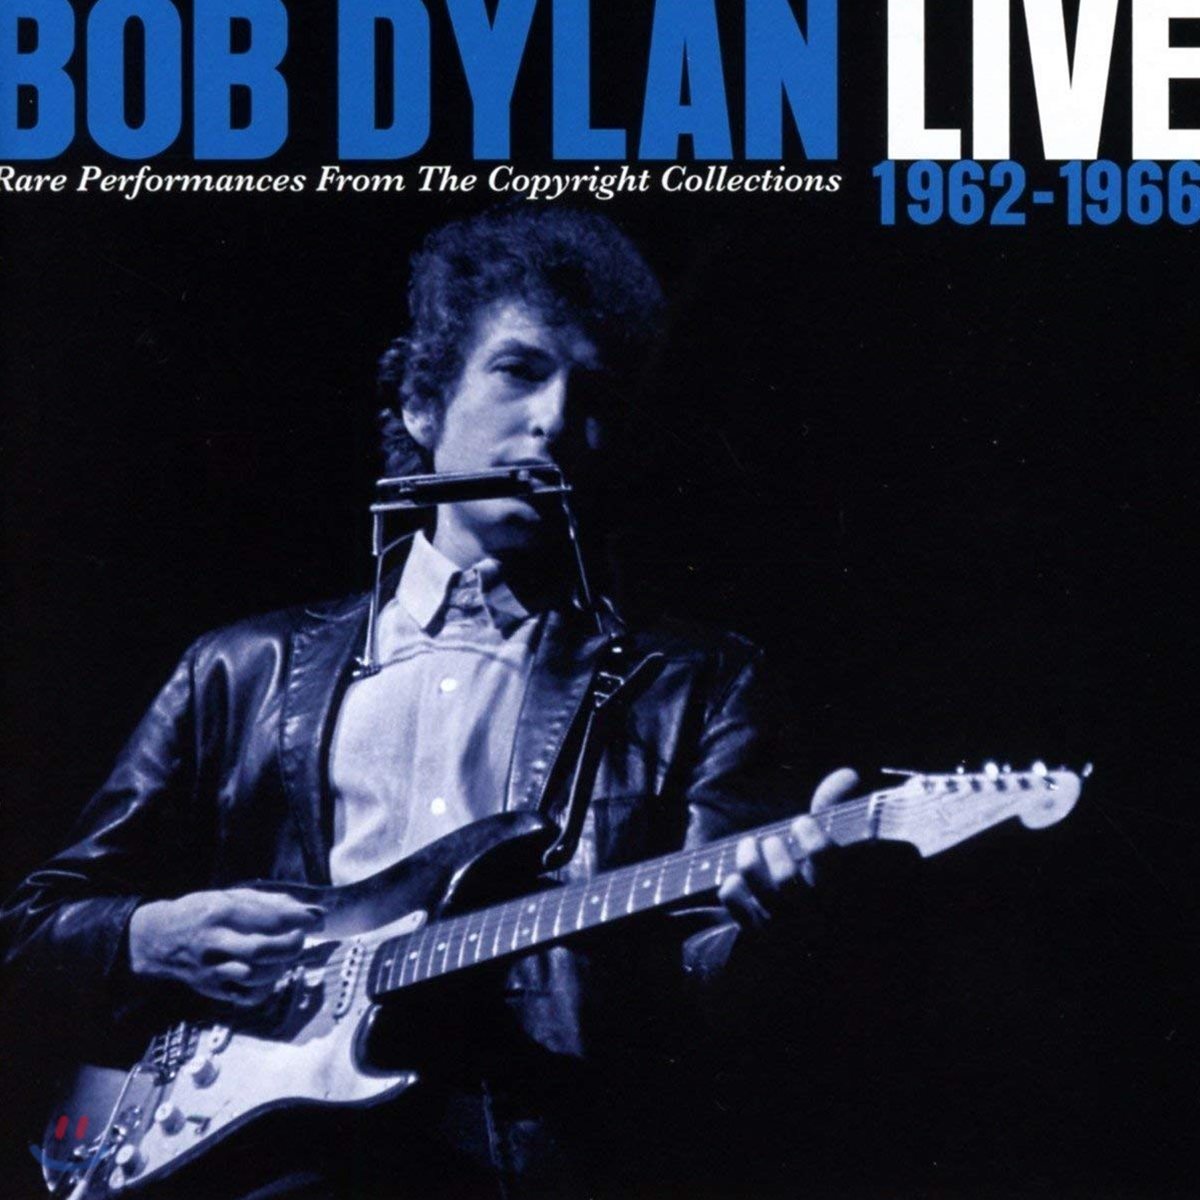 Bob Dylan (밥 딜런) - Live 1962-1966: Rare Performances From The Copyright Collections 